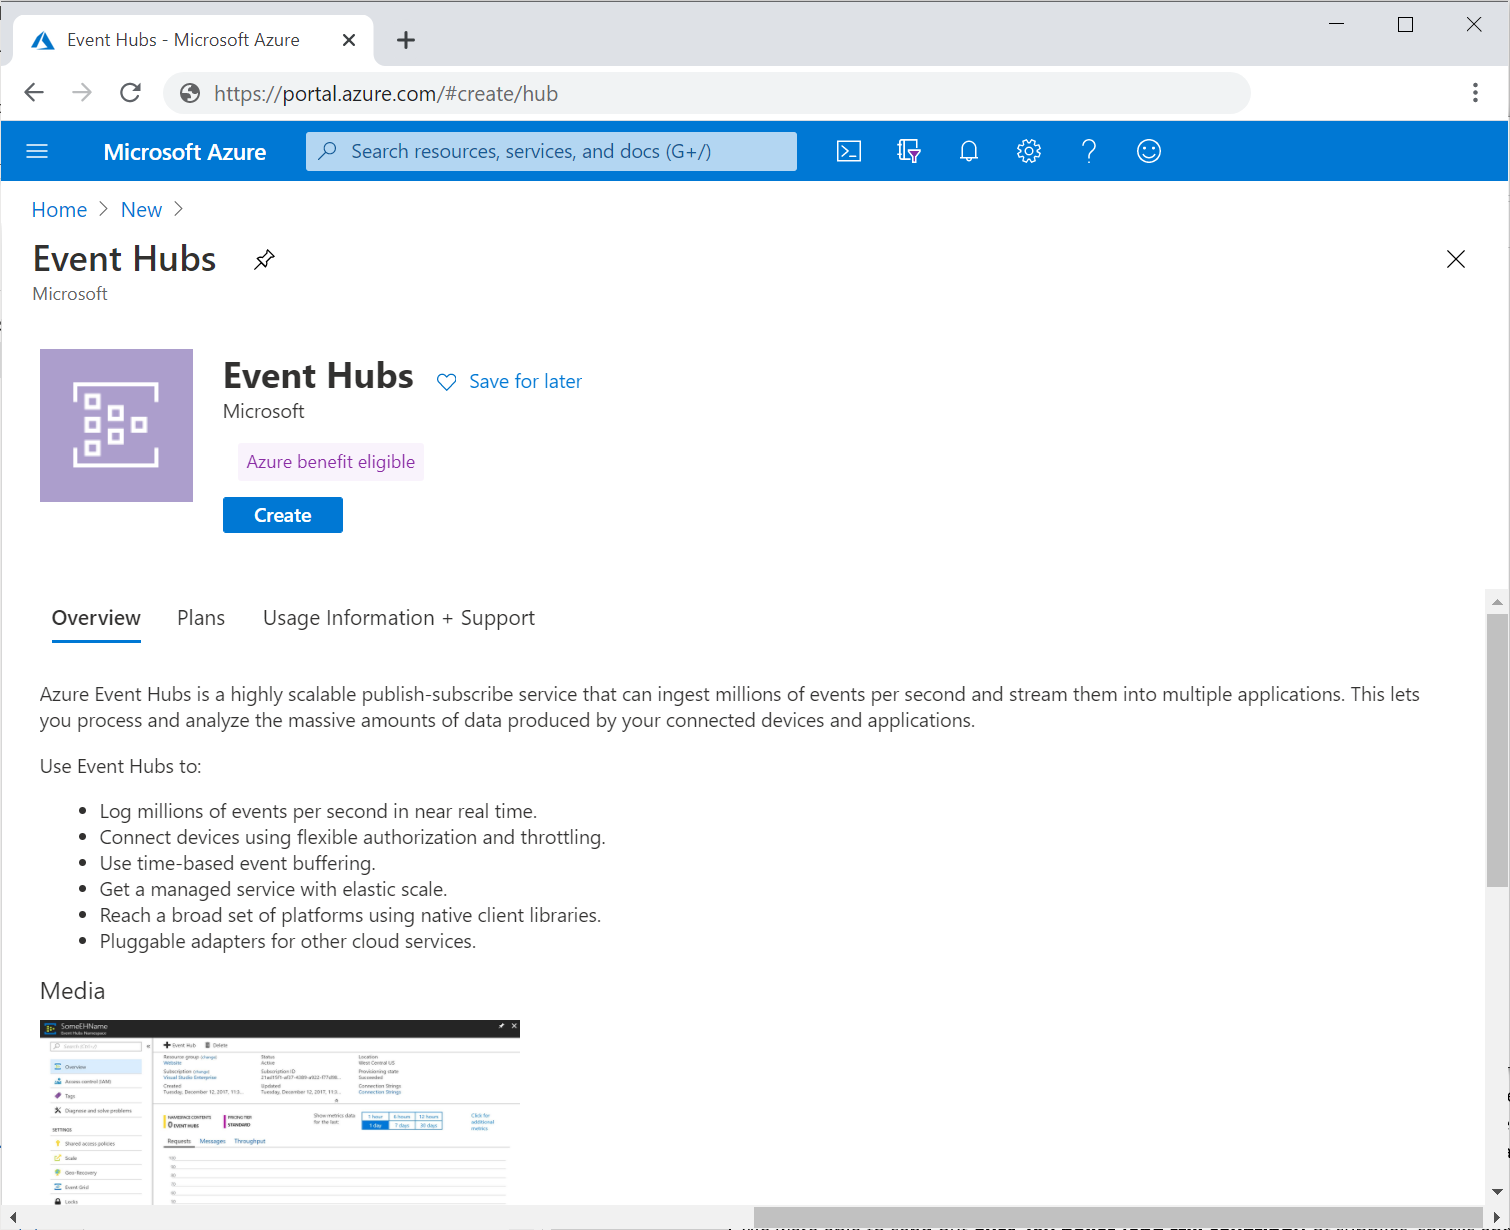 Create an event hub in the Azure portal.